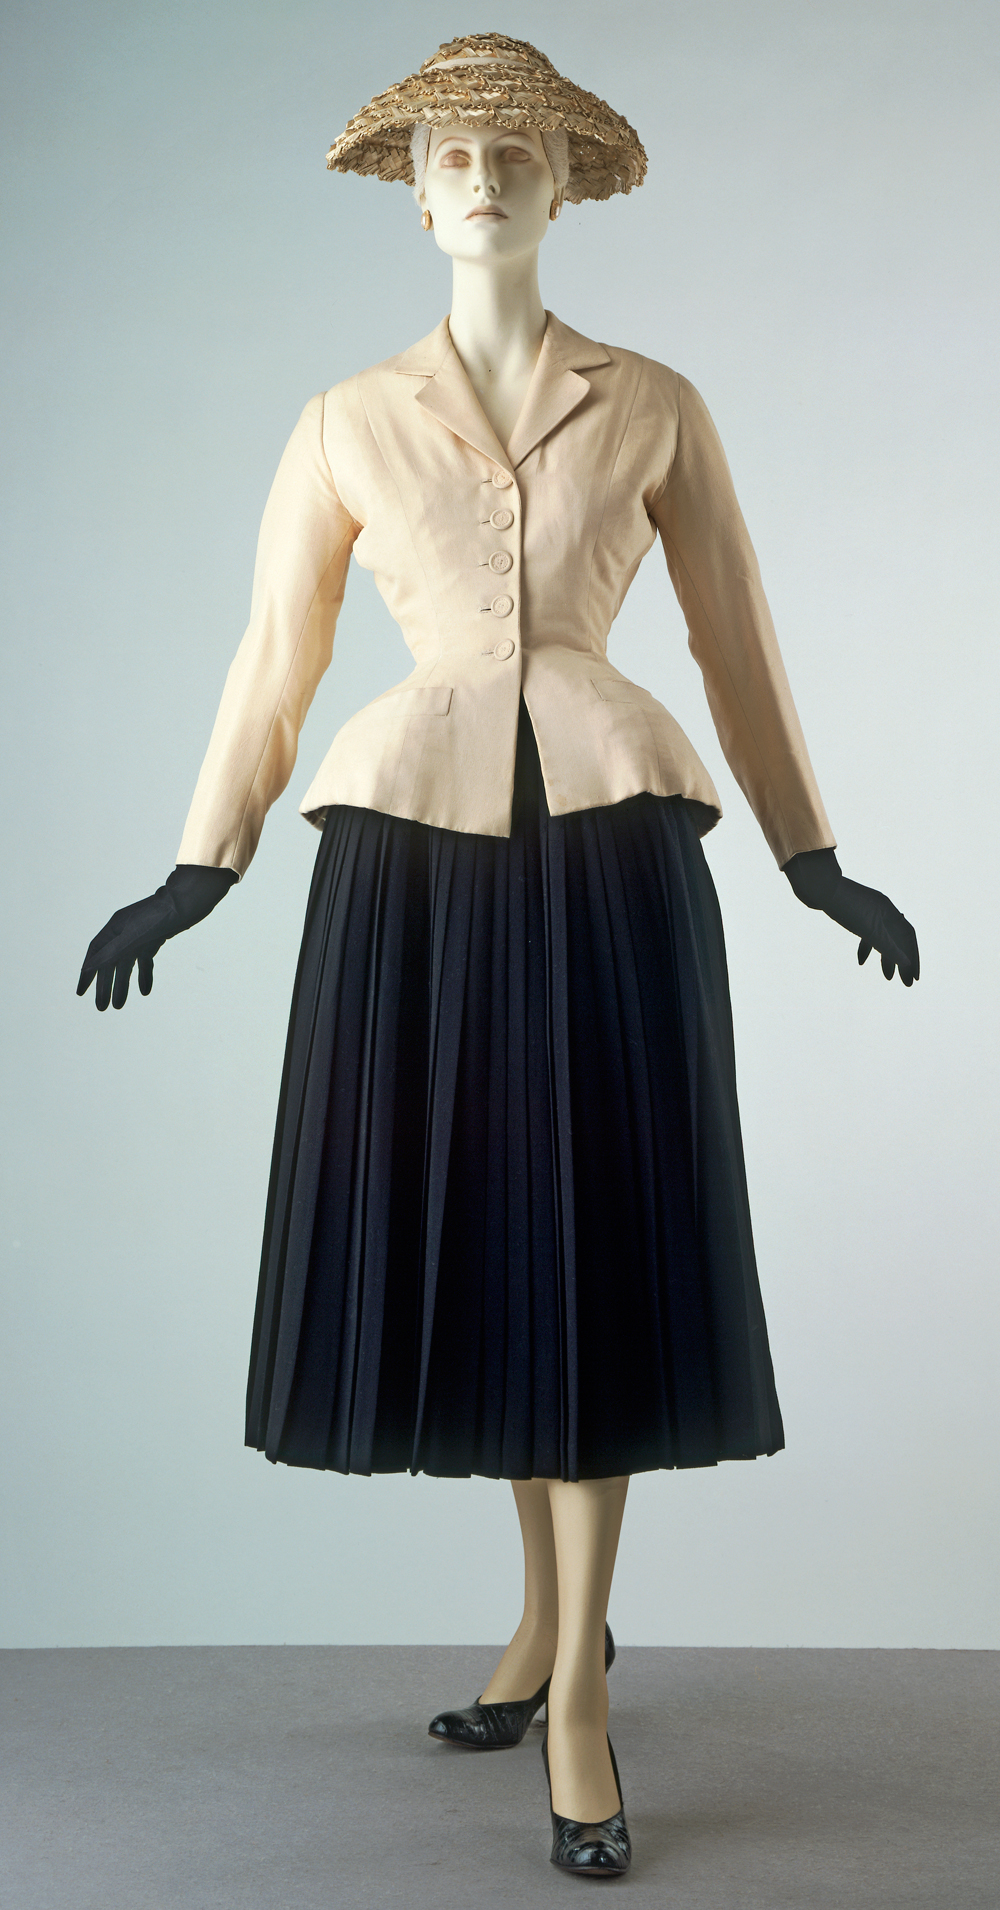 Bar Suit & Hat by Christian Dior, Spring/Summer 1947. Housed at the V&A Museum